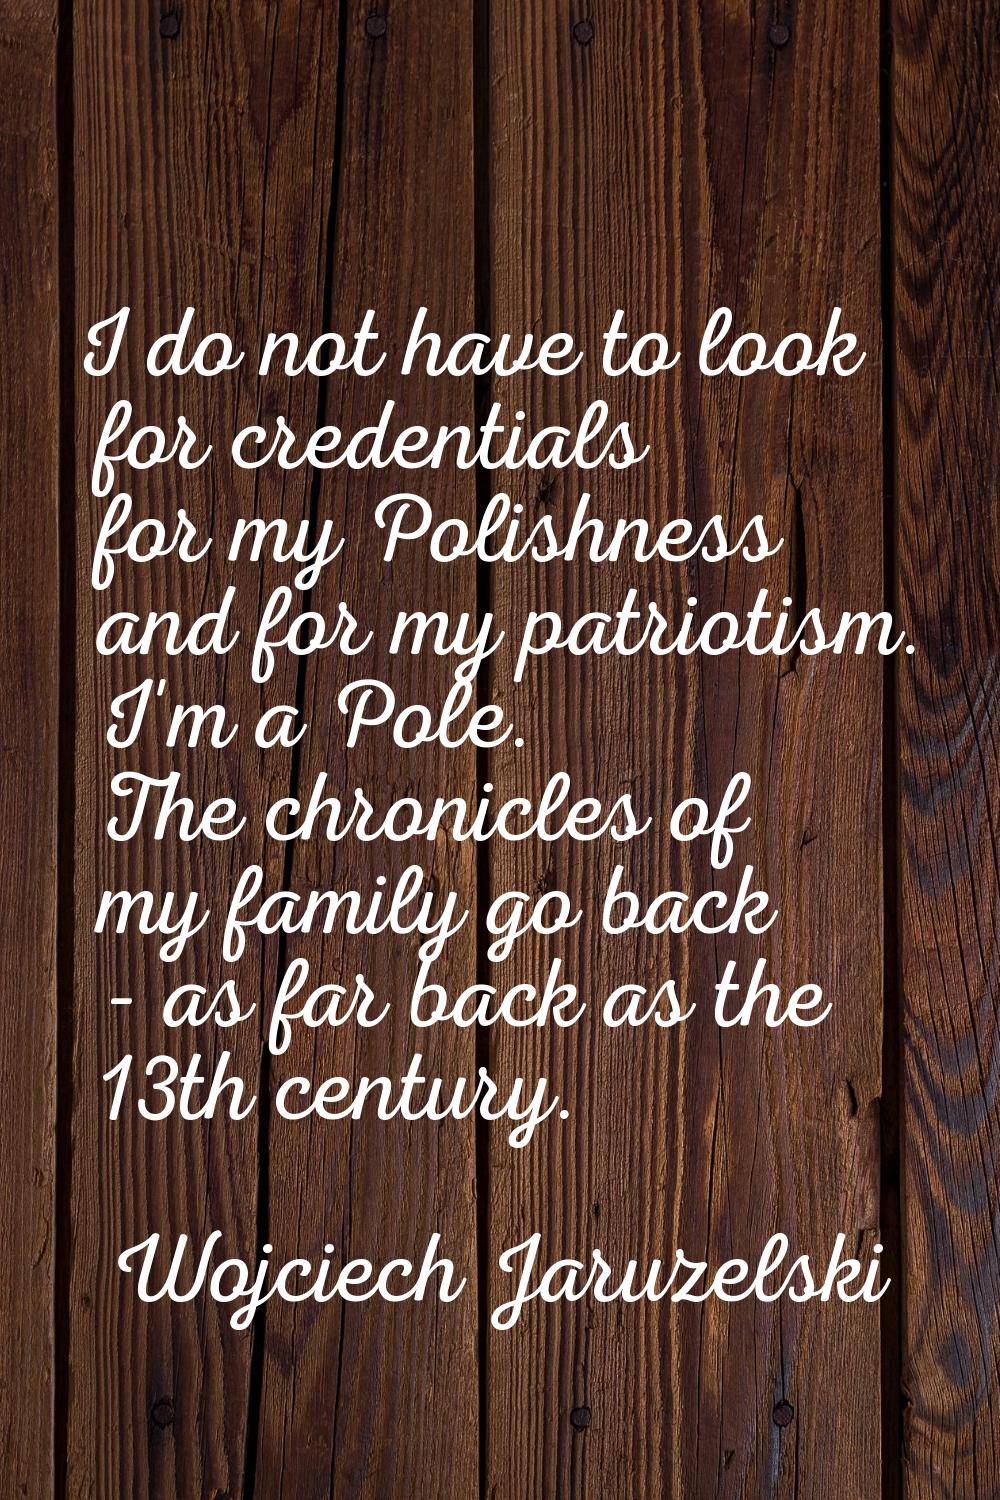 I do not have to look for credentials for my Polishness and for my patriotism. I'm a Pole. The chro